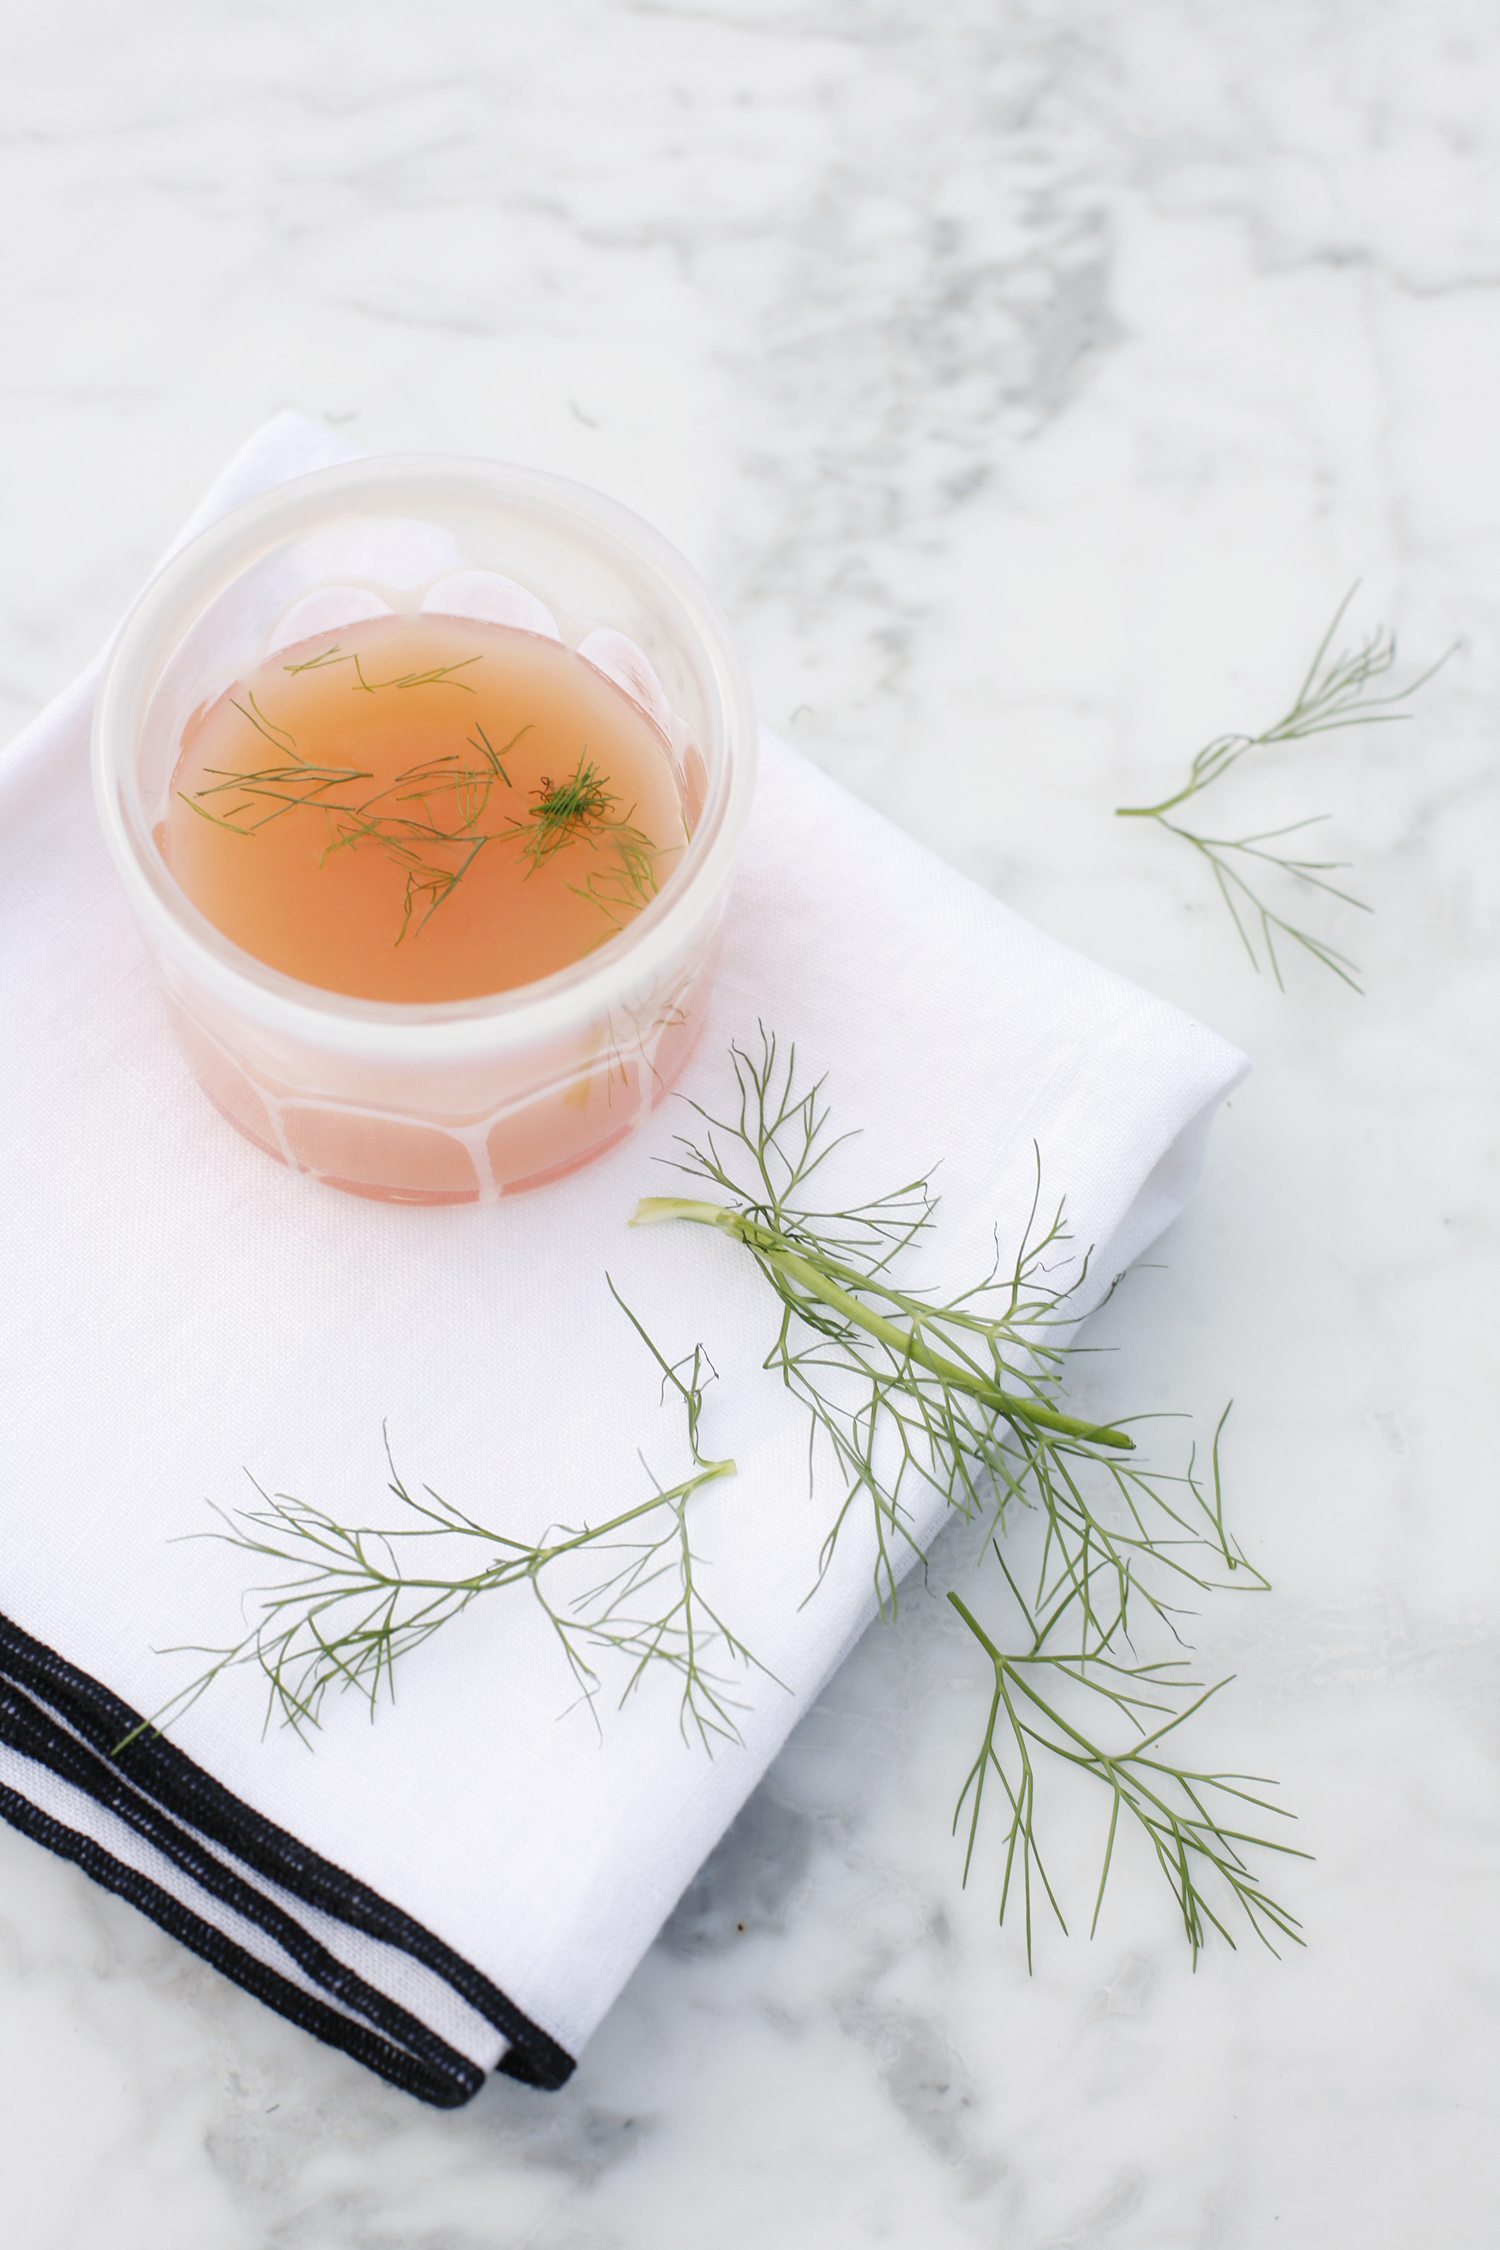 the rooftop cocktail - mezcal, grapefruit and fennel | recipe on coco kelley